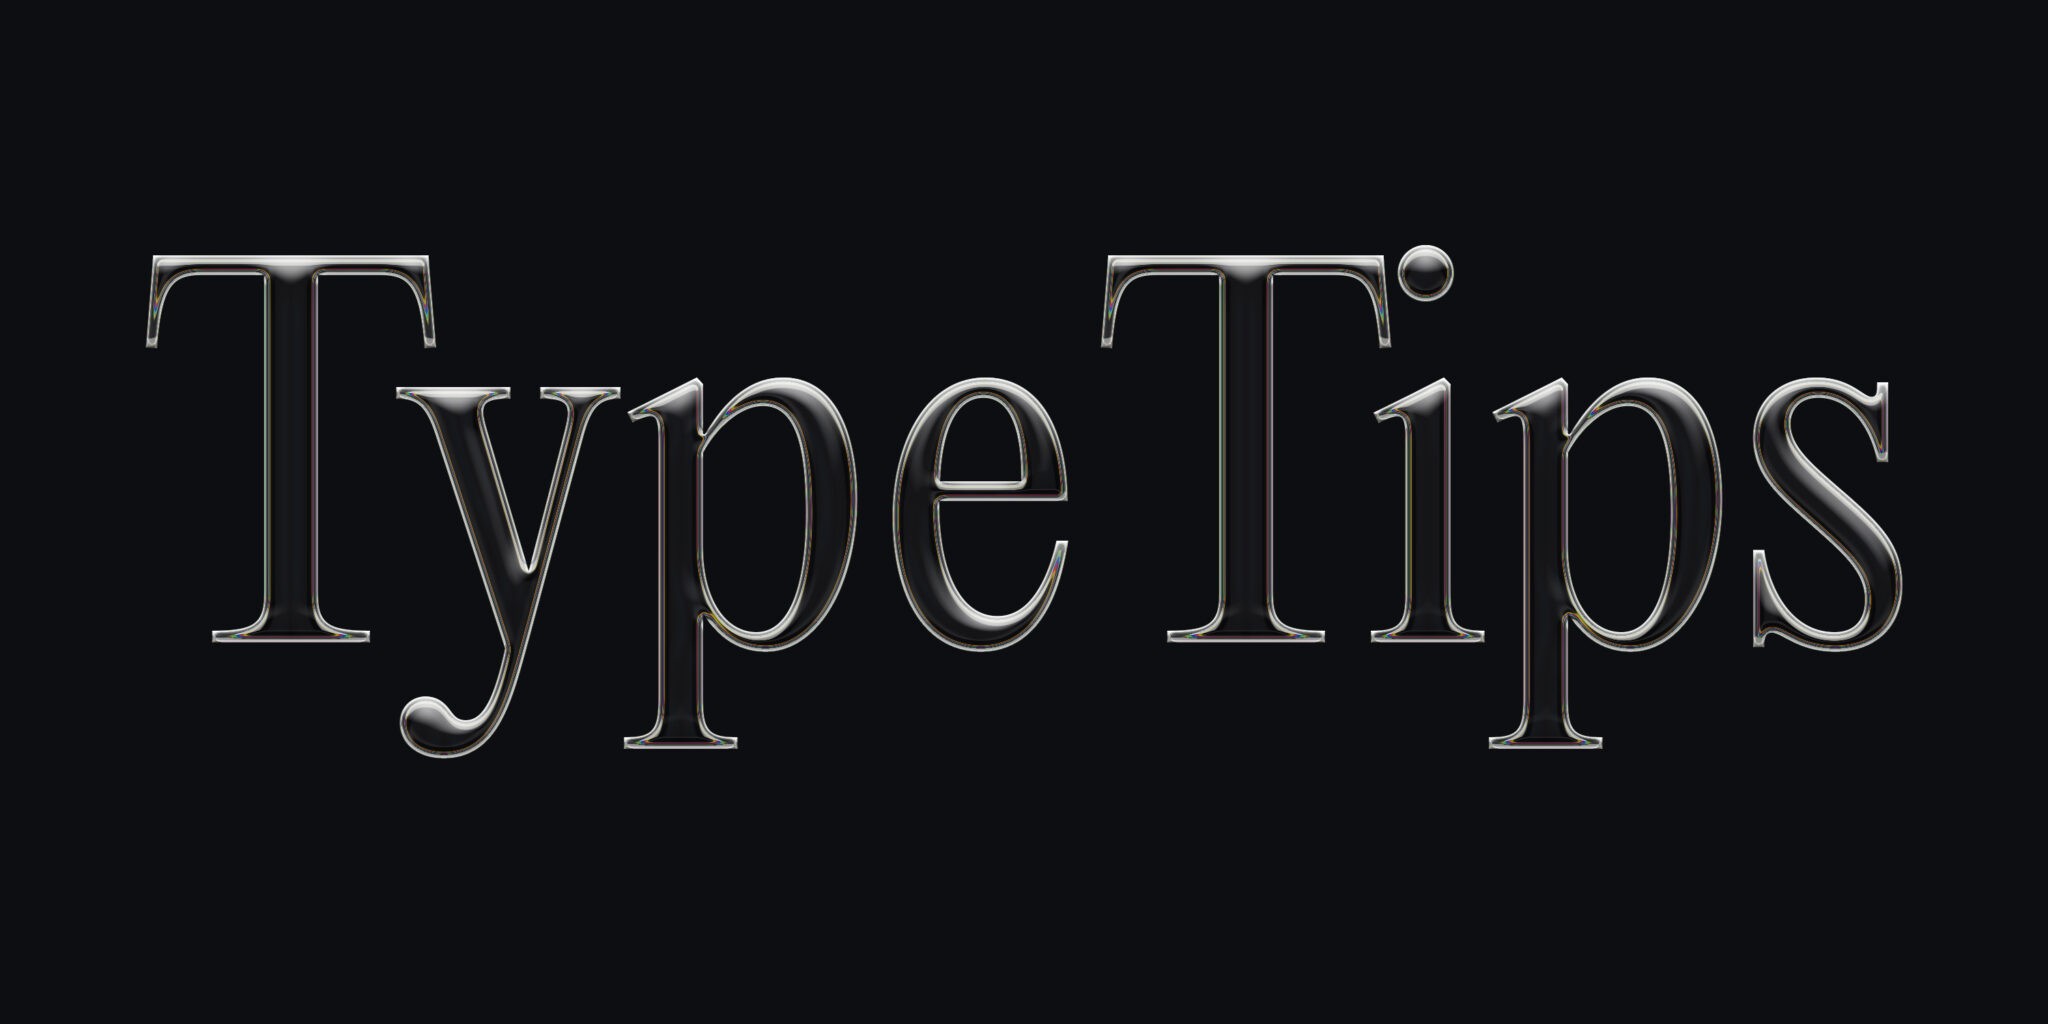 The image displays the text "Type Tips" written in the font "Editorial New" with a glass filter applied to it using Photoshop. The font is centered on a plain black background. This experimental image is used to accompany a blog post titled "20 Tips to Improve your Typography Skills"